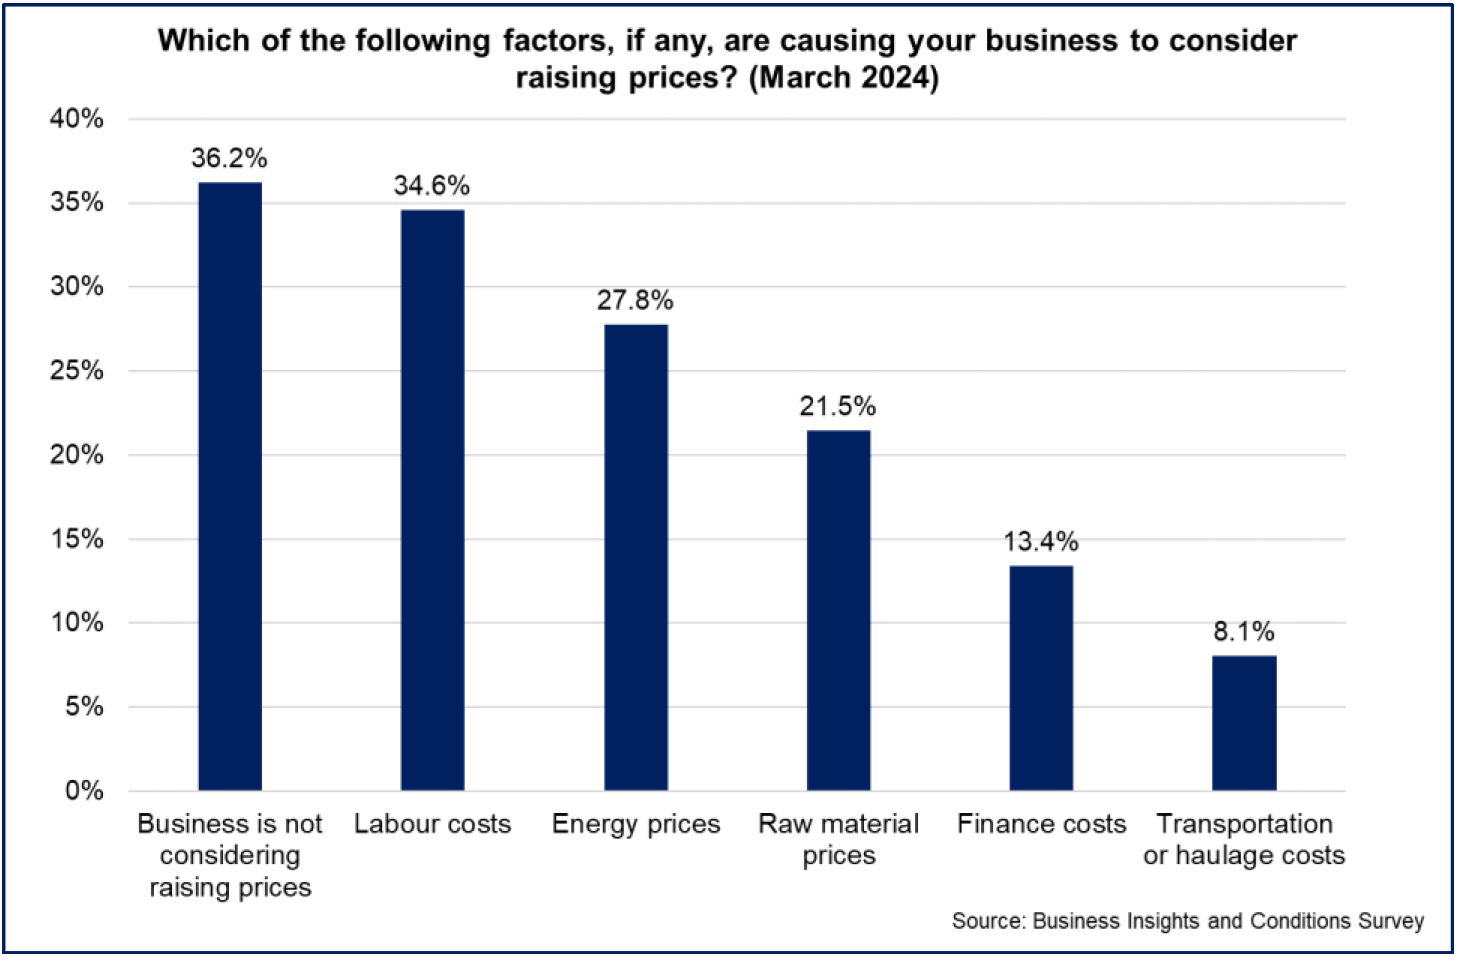 highest share of businesses are not considering raising prices whilst labour costs and energy prices are the main factors causing businesses to consider raising prices